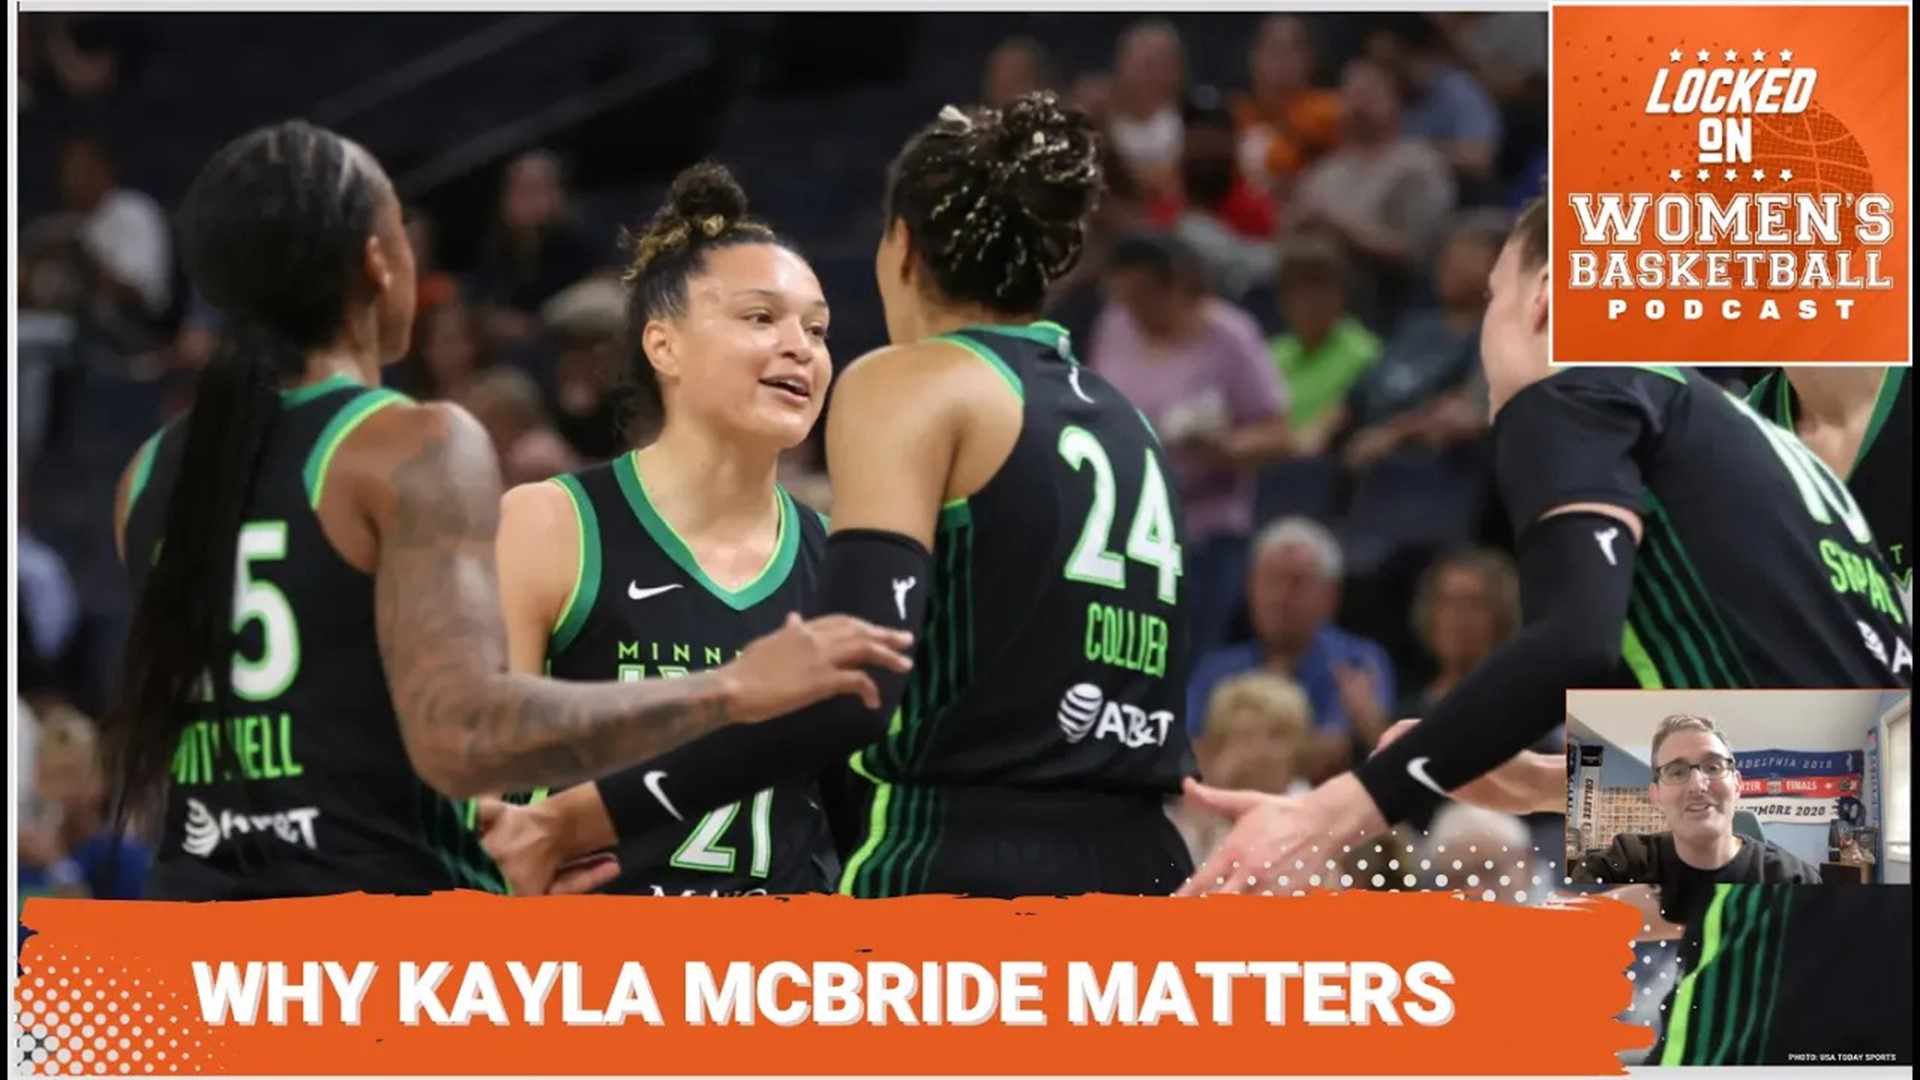 Kayla McBride matters. That's the subject of the latest Locked On Women's Basketball podcast, with host Howard Megdal discussing the history of McBride's coverage